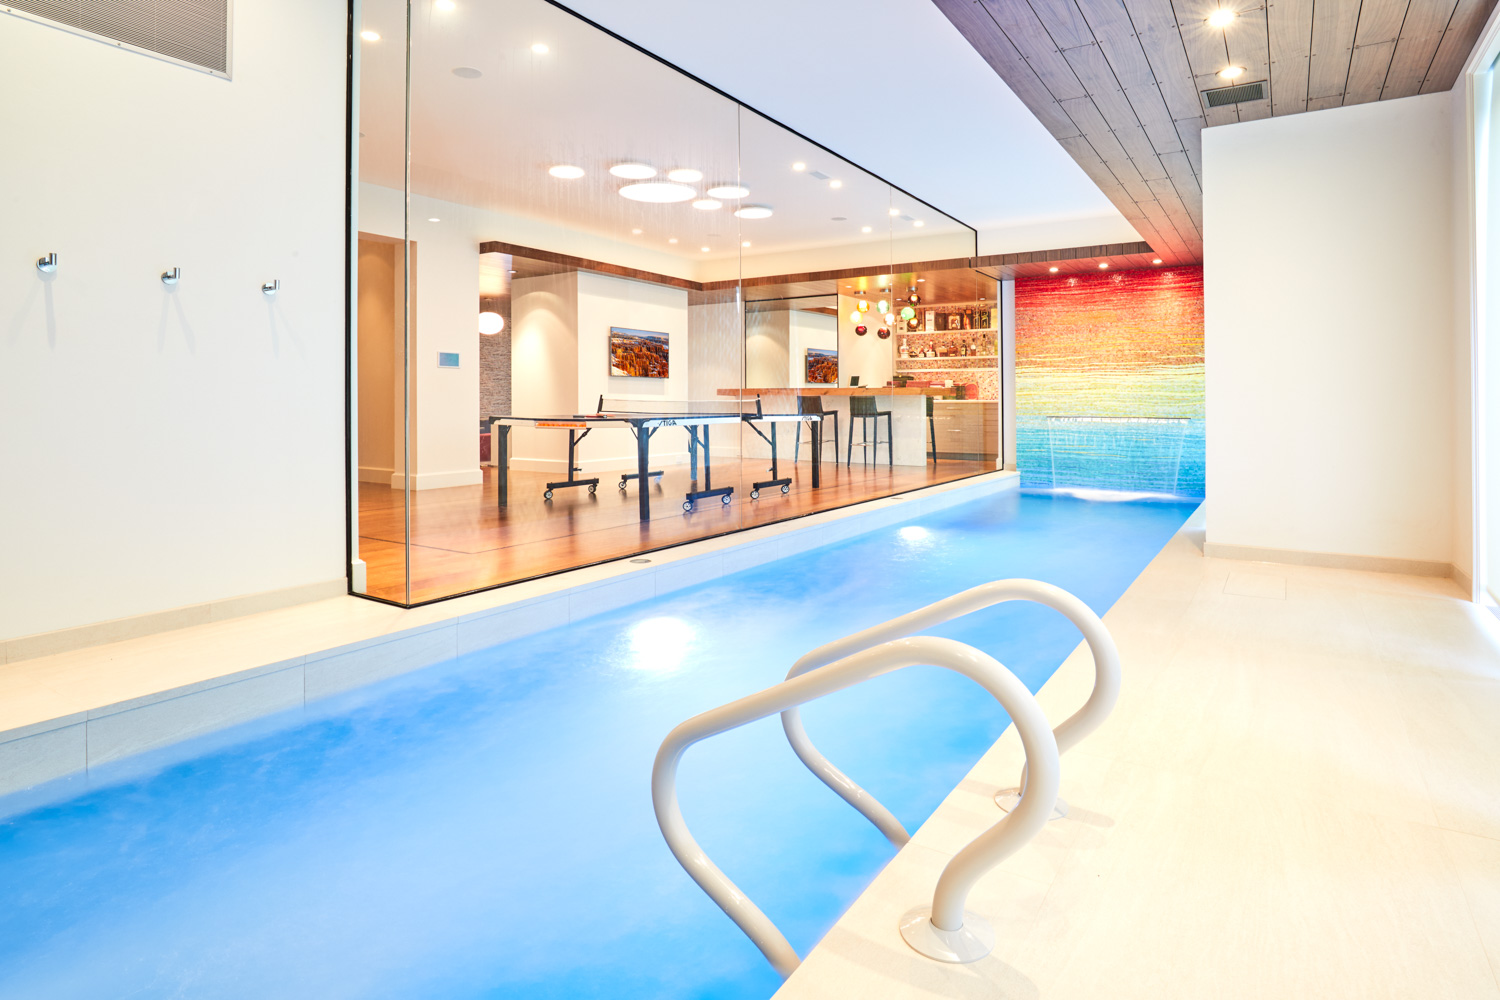 1-toronto-professional-interior-design-architecture-photographer-photography-indoor-pool-professional-image-architect-tile-waterfall-electronics-window-glass-bar-high-quality-airbnb.jpg